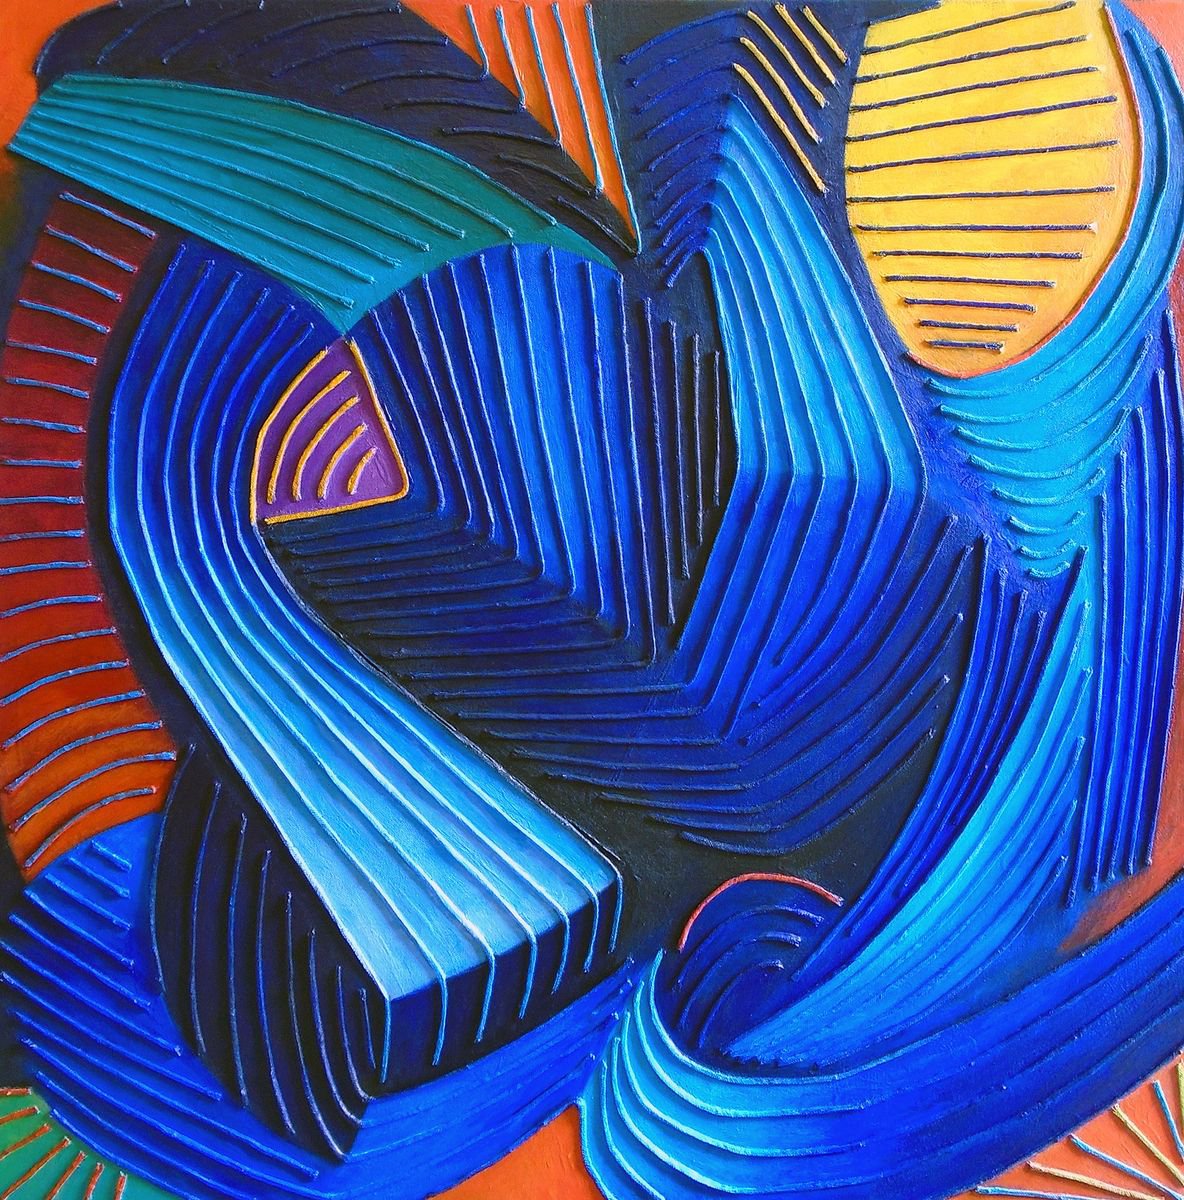 ABSTRACT OF STRING 1 by Stephen Conroy